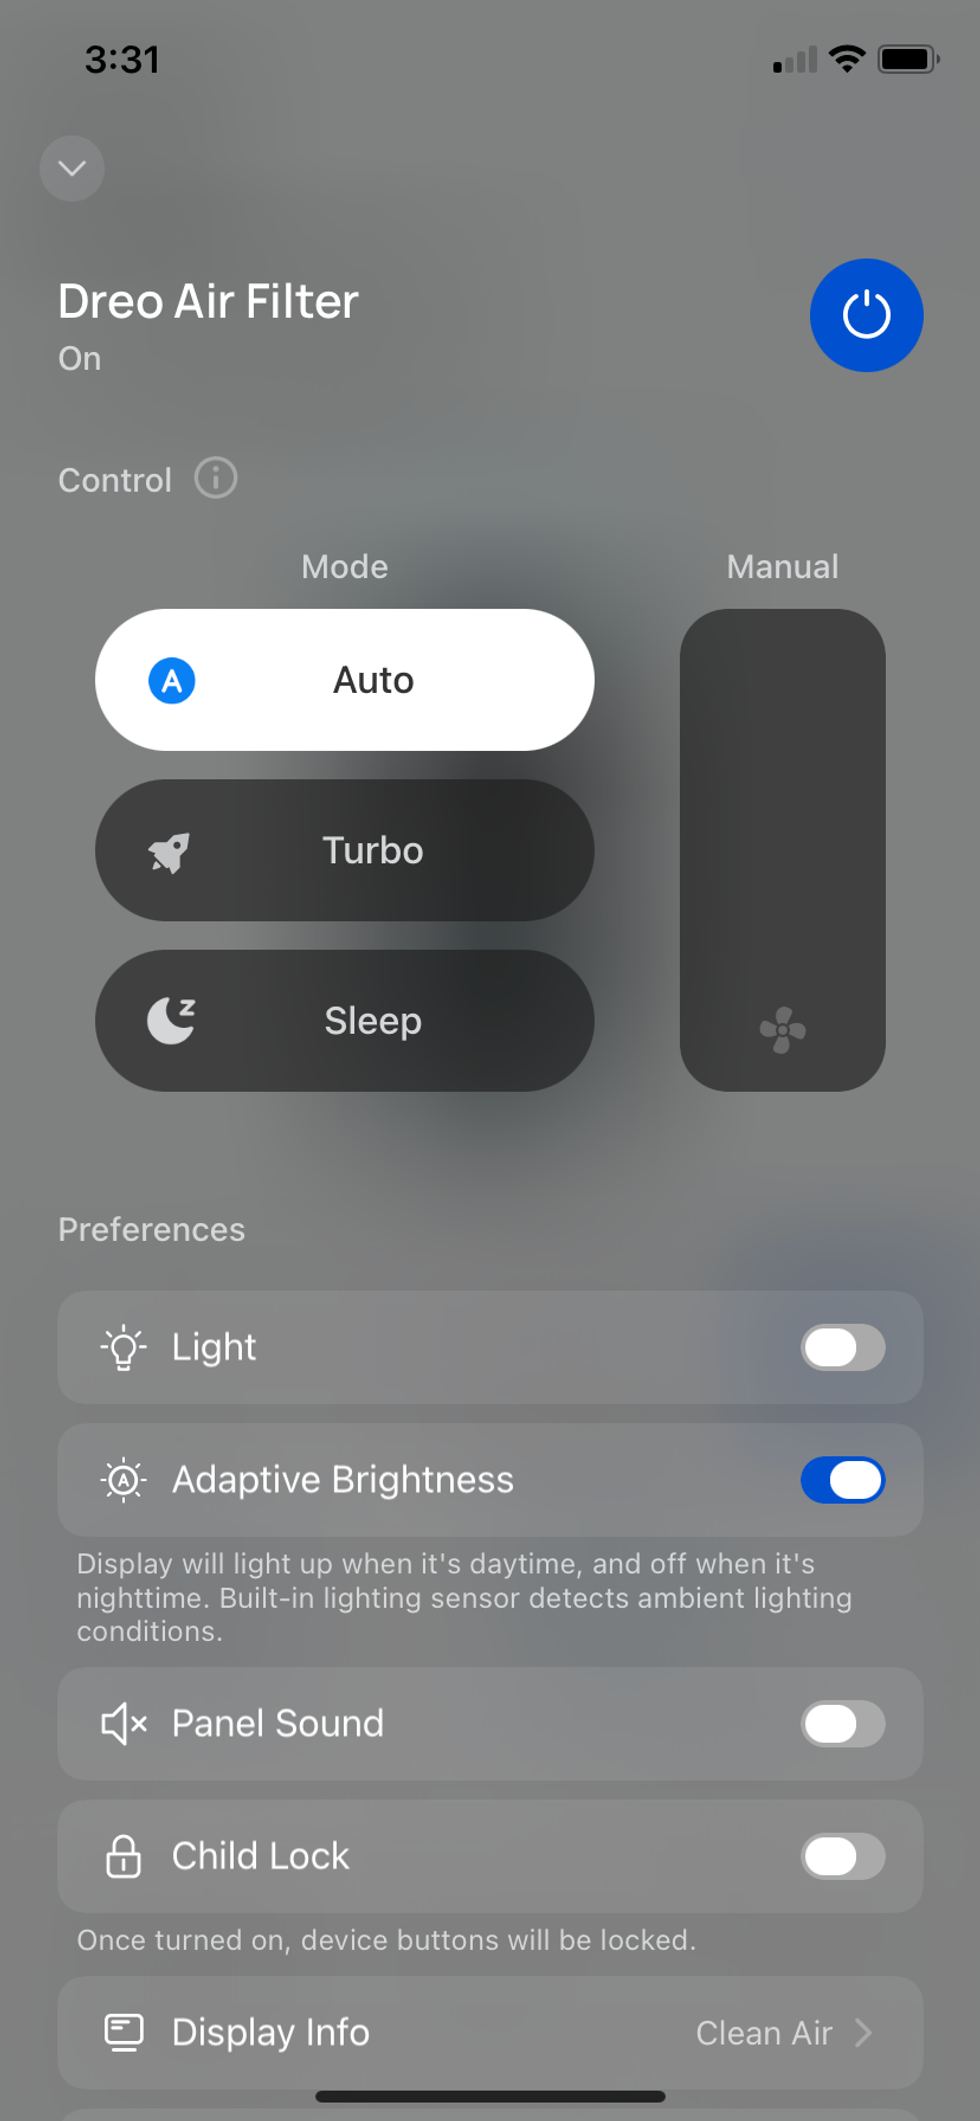 Dreo app showing mode setting